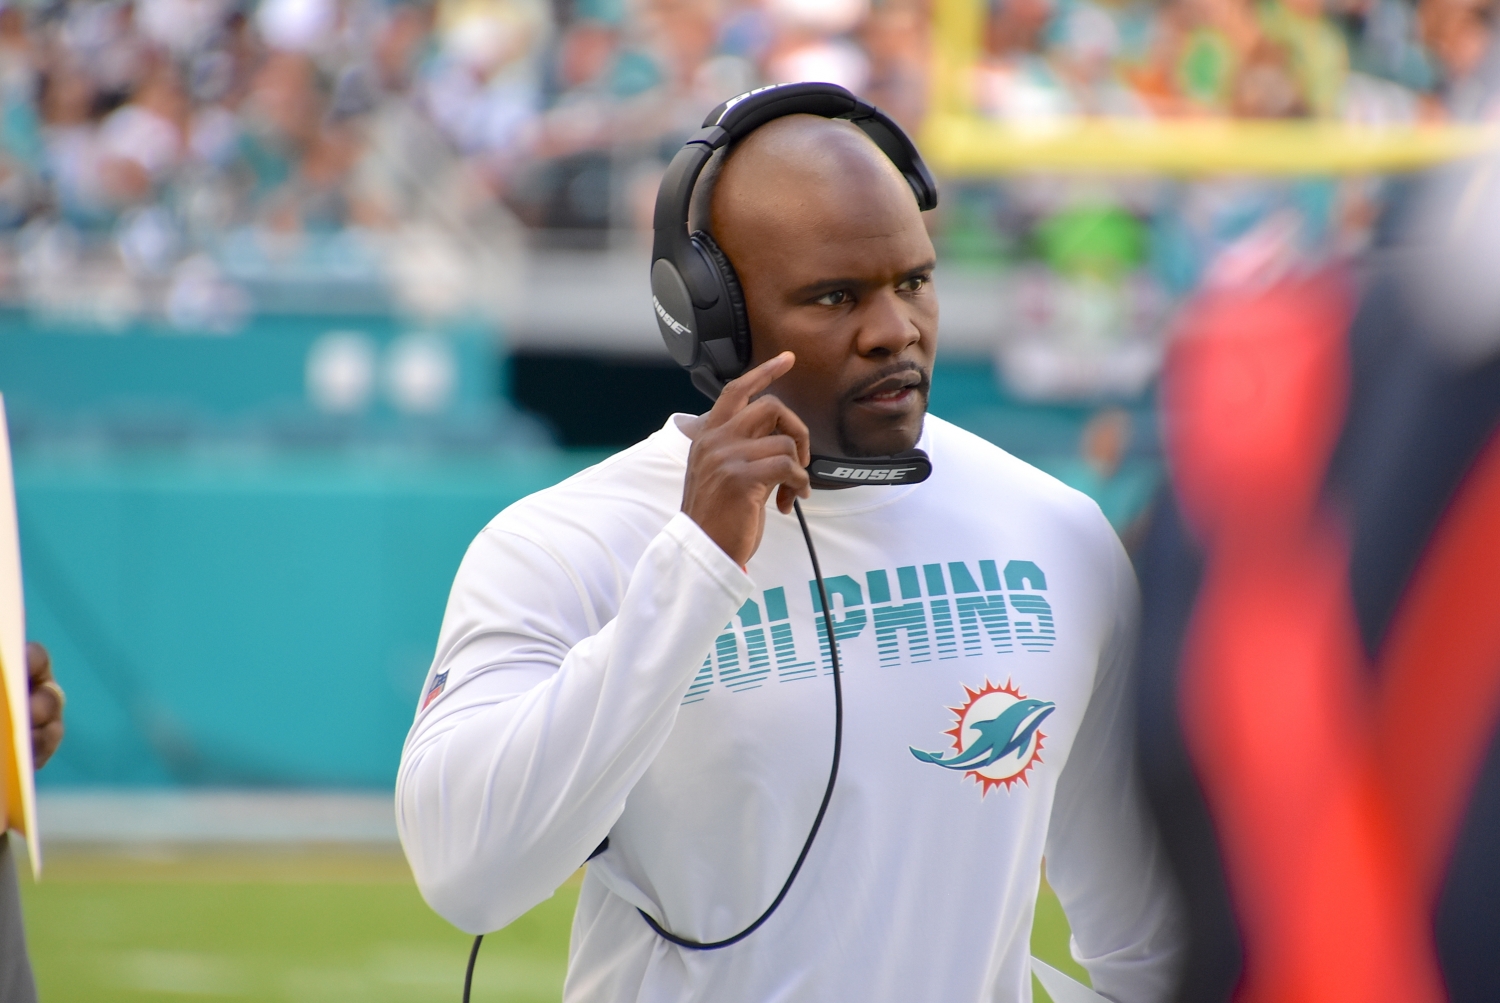 Miami Dolphins coach Brian Flores has been fired